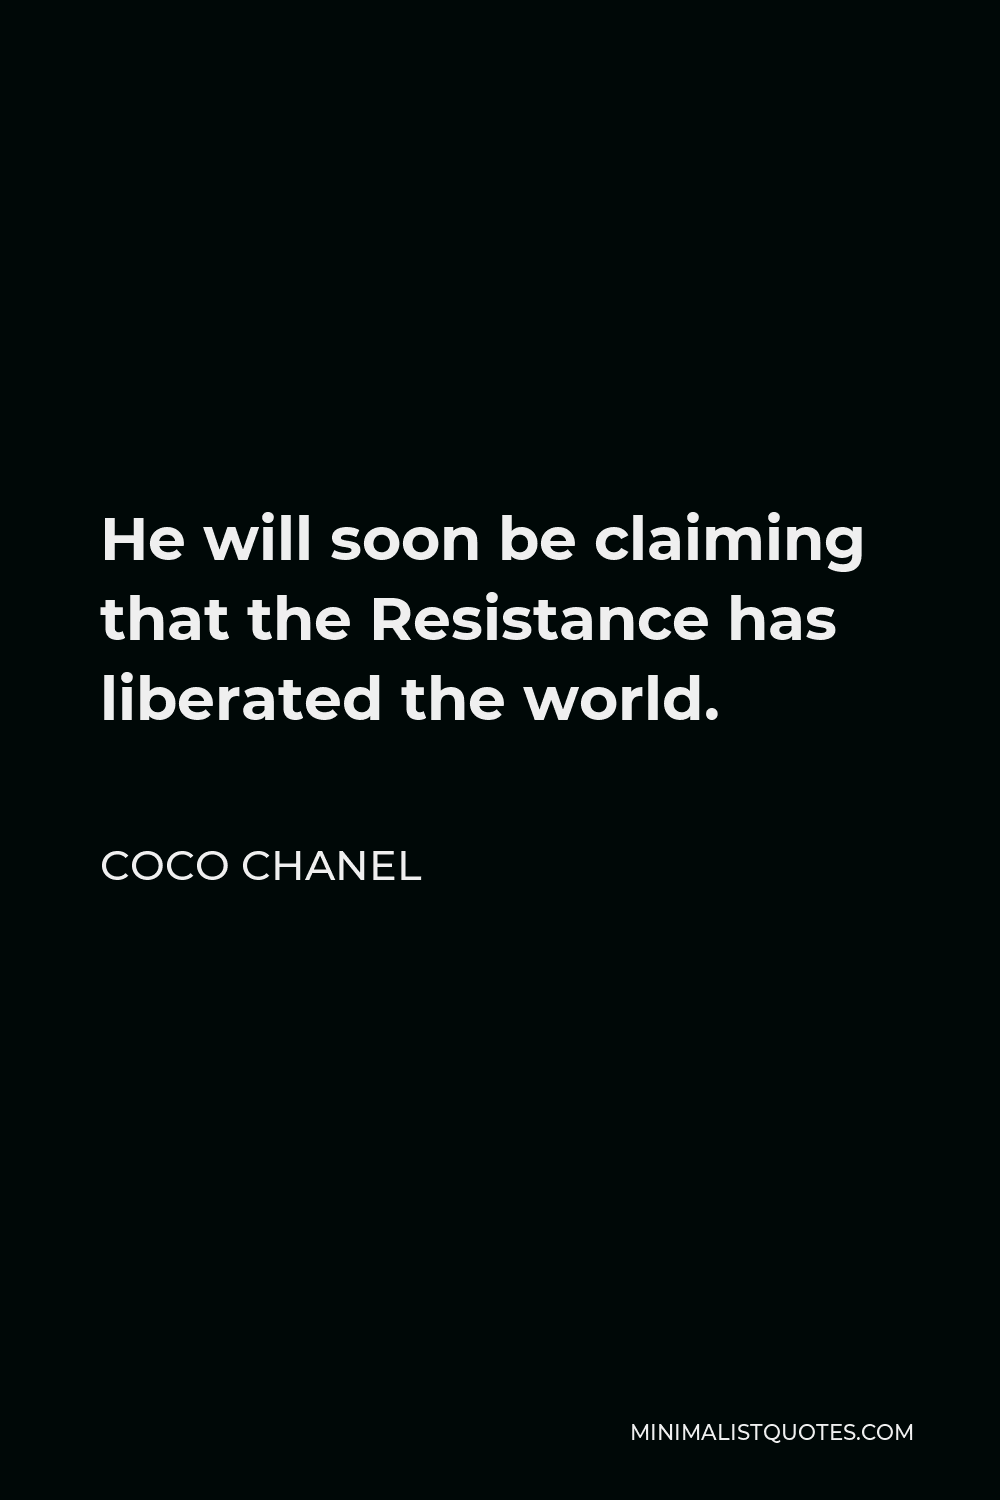 Coco Chanel Quote - He will soon be claiming that the Resistance has liberated the world.